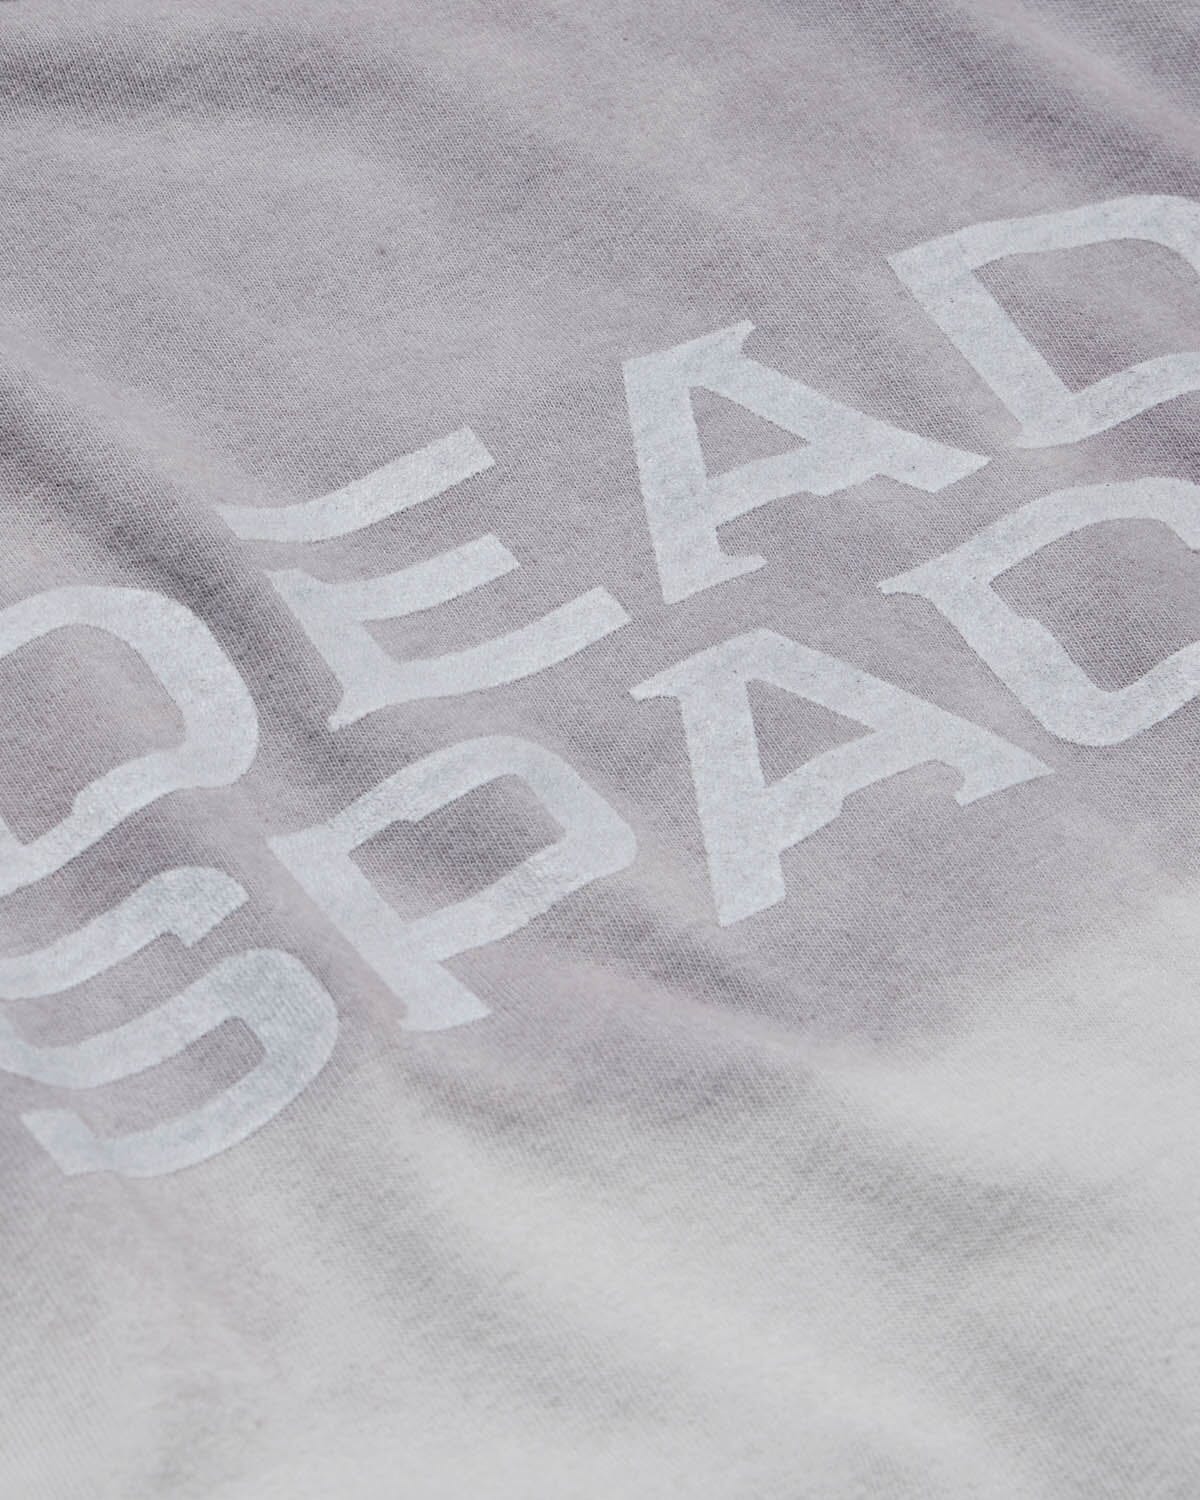 DS LOW HEALTH S/S TEE CONRETE TEE DEADSPACE2 